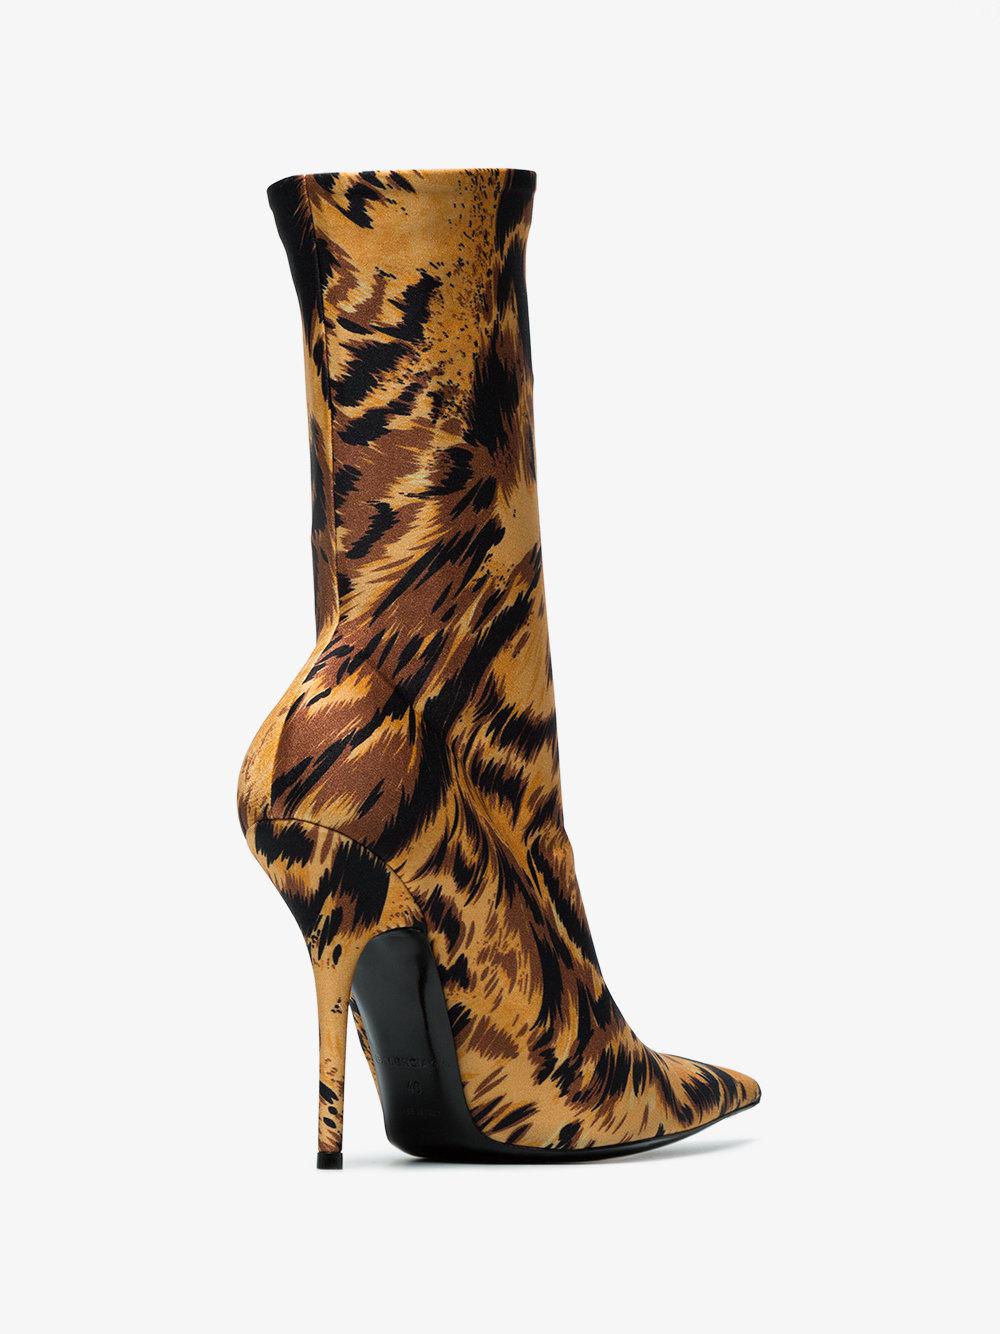 Balenciaga Leopard Print Knife 110 Ankle Boots in Brown | Lyst